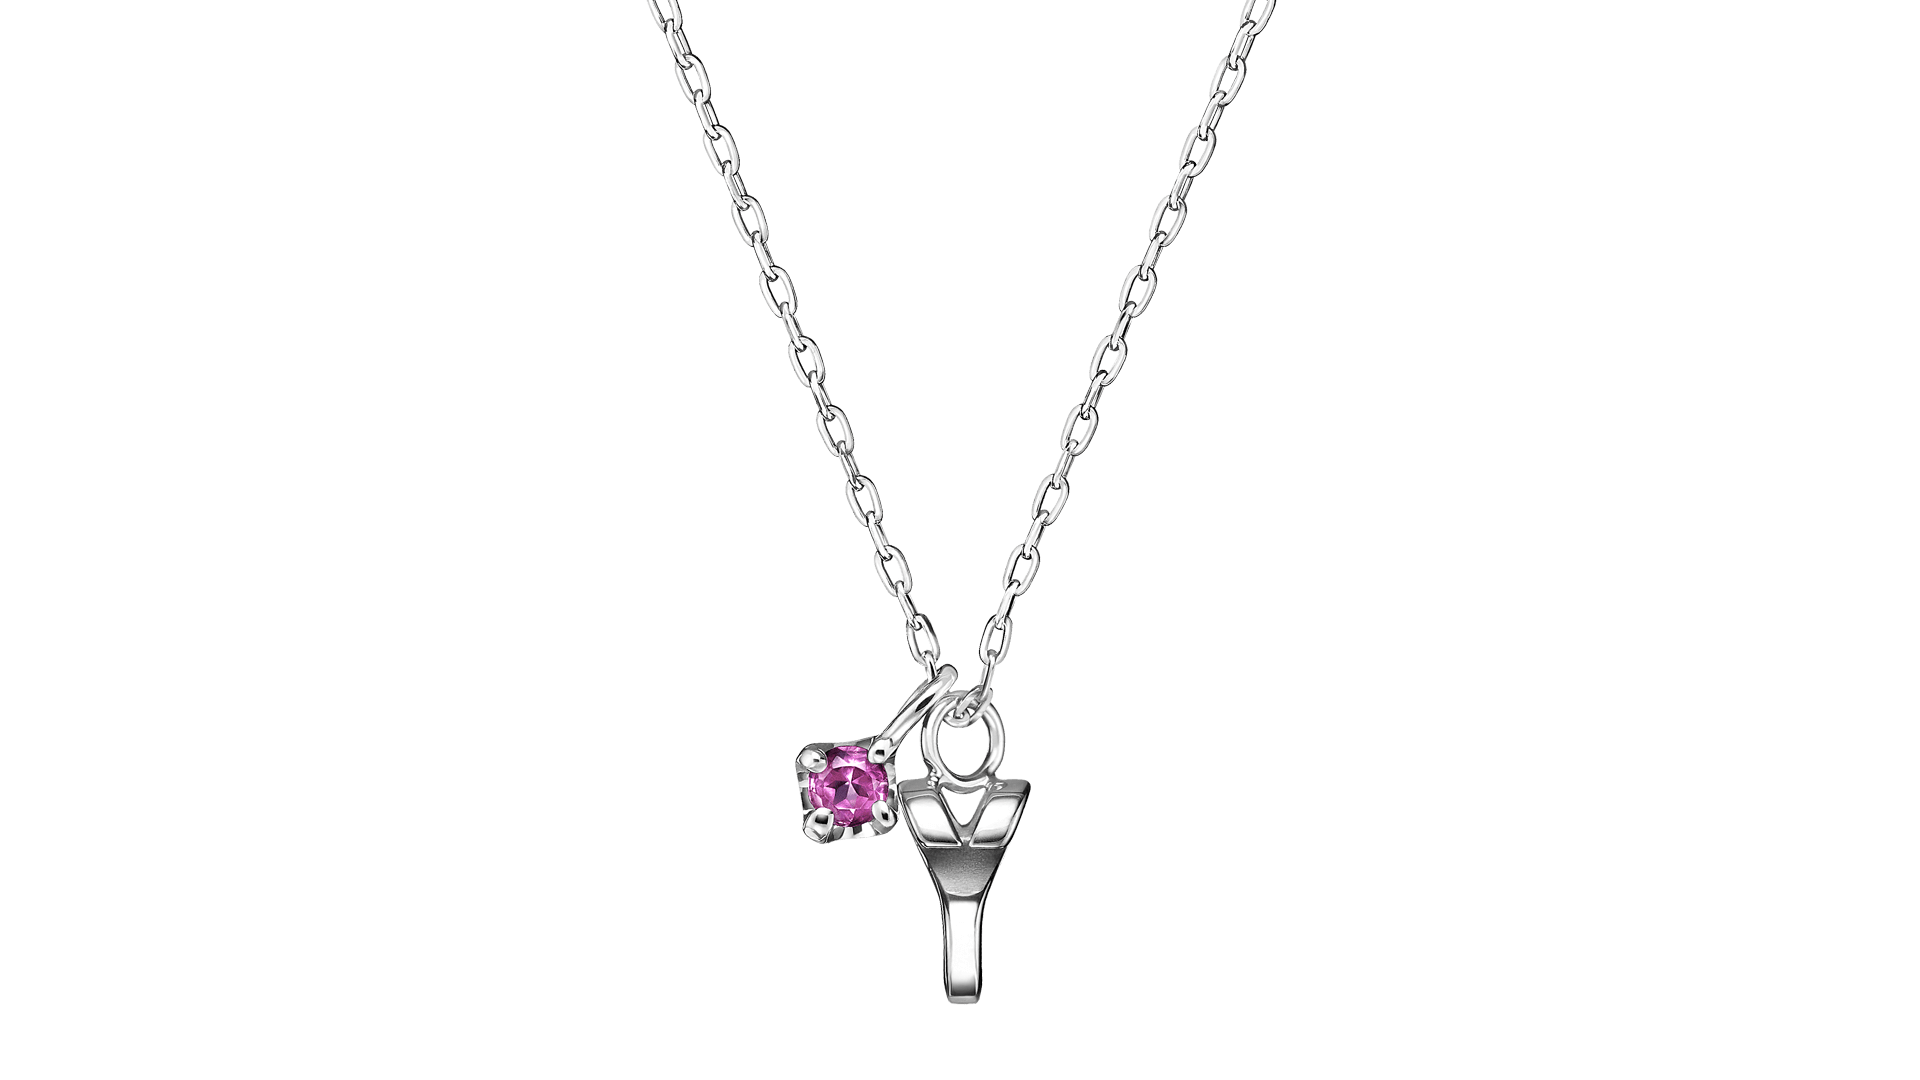 Personal Necklace パーソナルネックレス_3_ネックレス